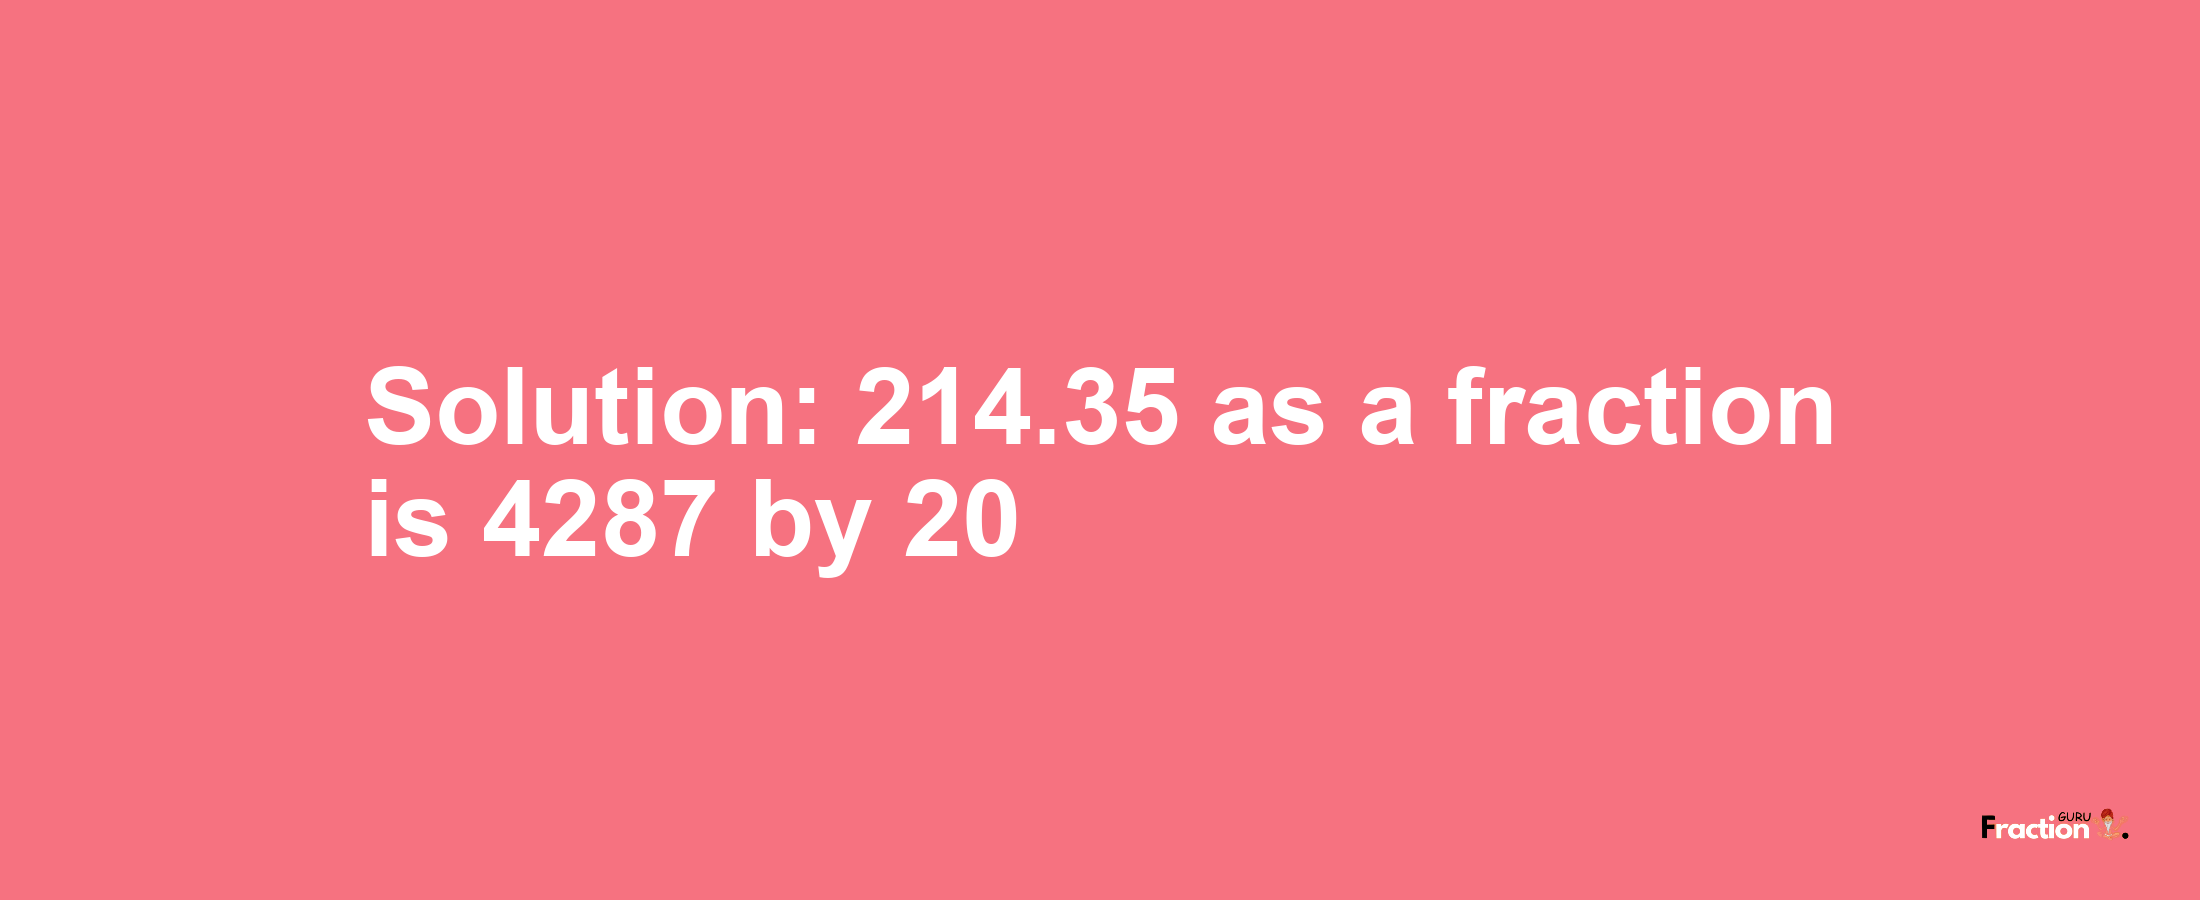 Solution:214.35 as a fraction is 4287/20